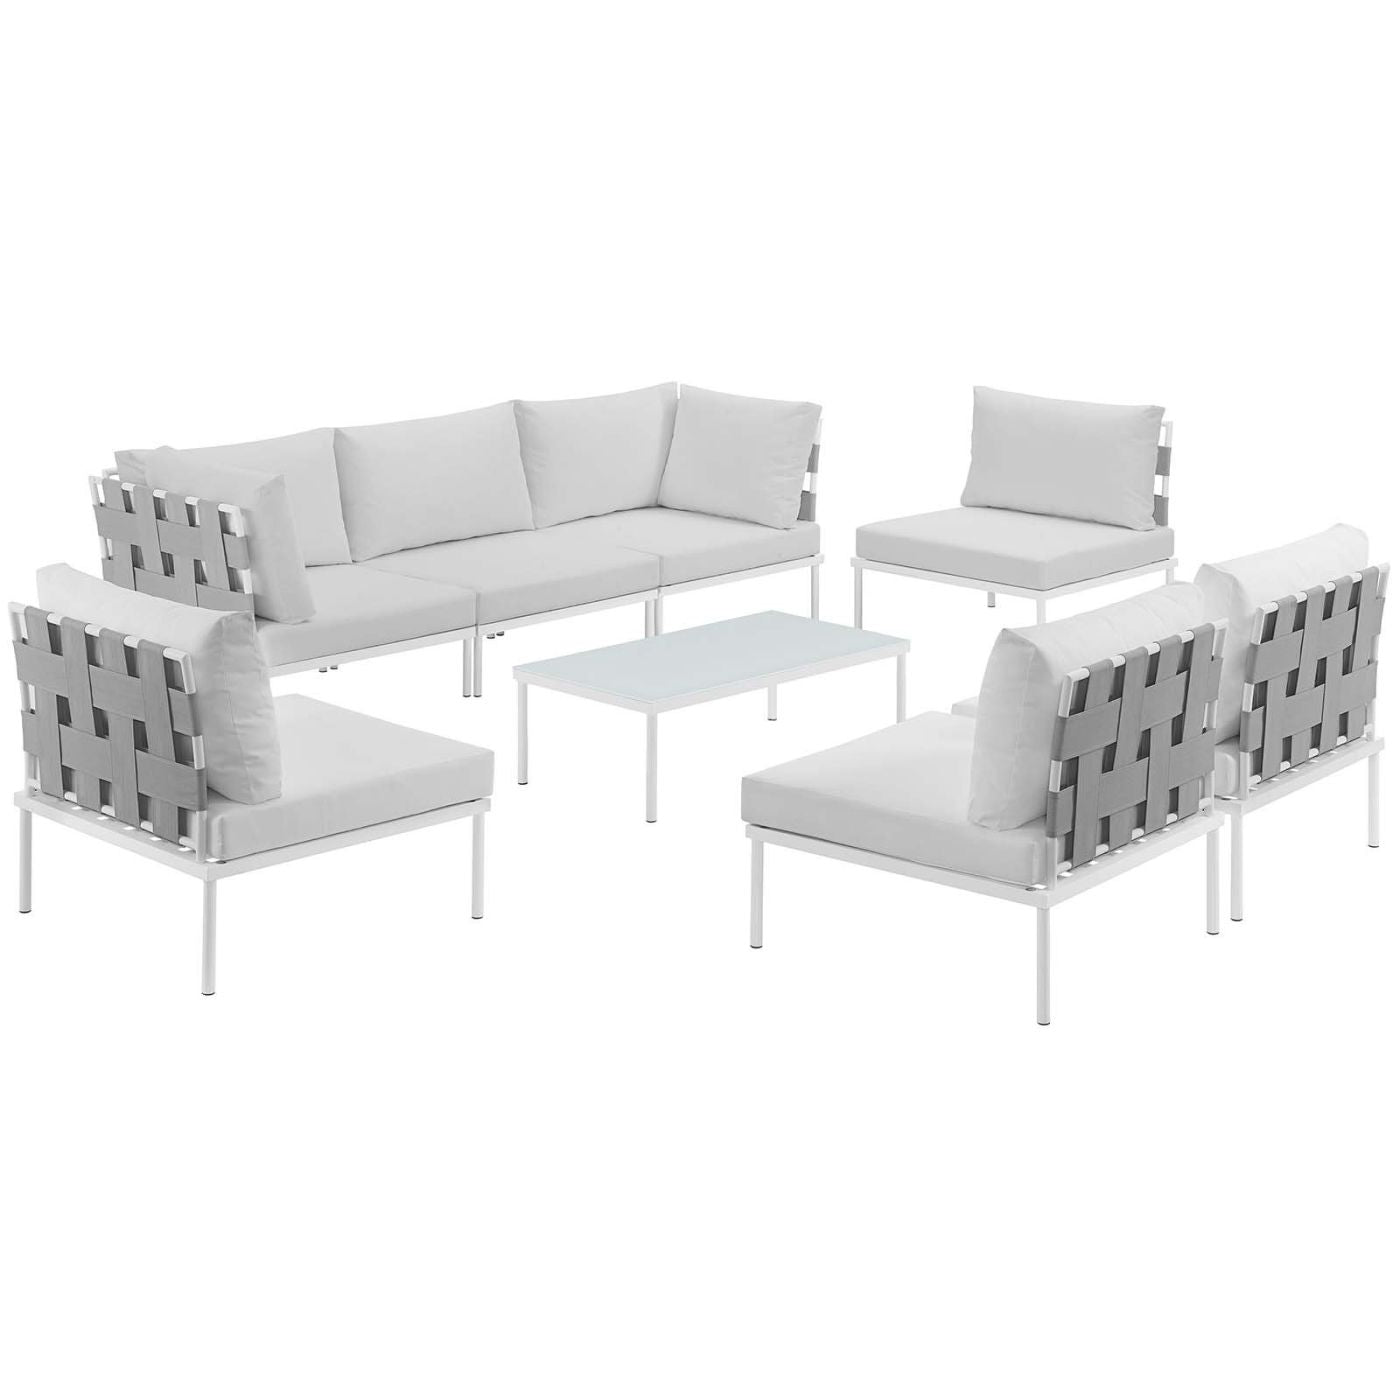 Modway Outdoor Patio Sets On Sale Eei 2625 Whi Whi Set Harmony 8 Piece Outdoor Patio Aluminum Sectional Sofa Set Only Only 2 062 80 At Contemporary